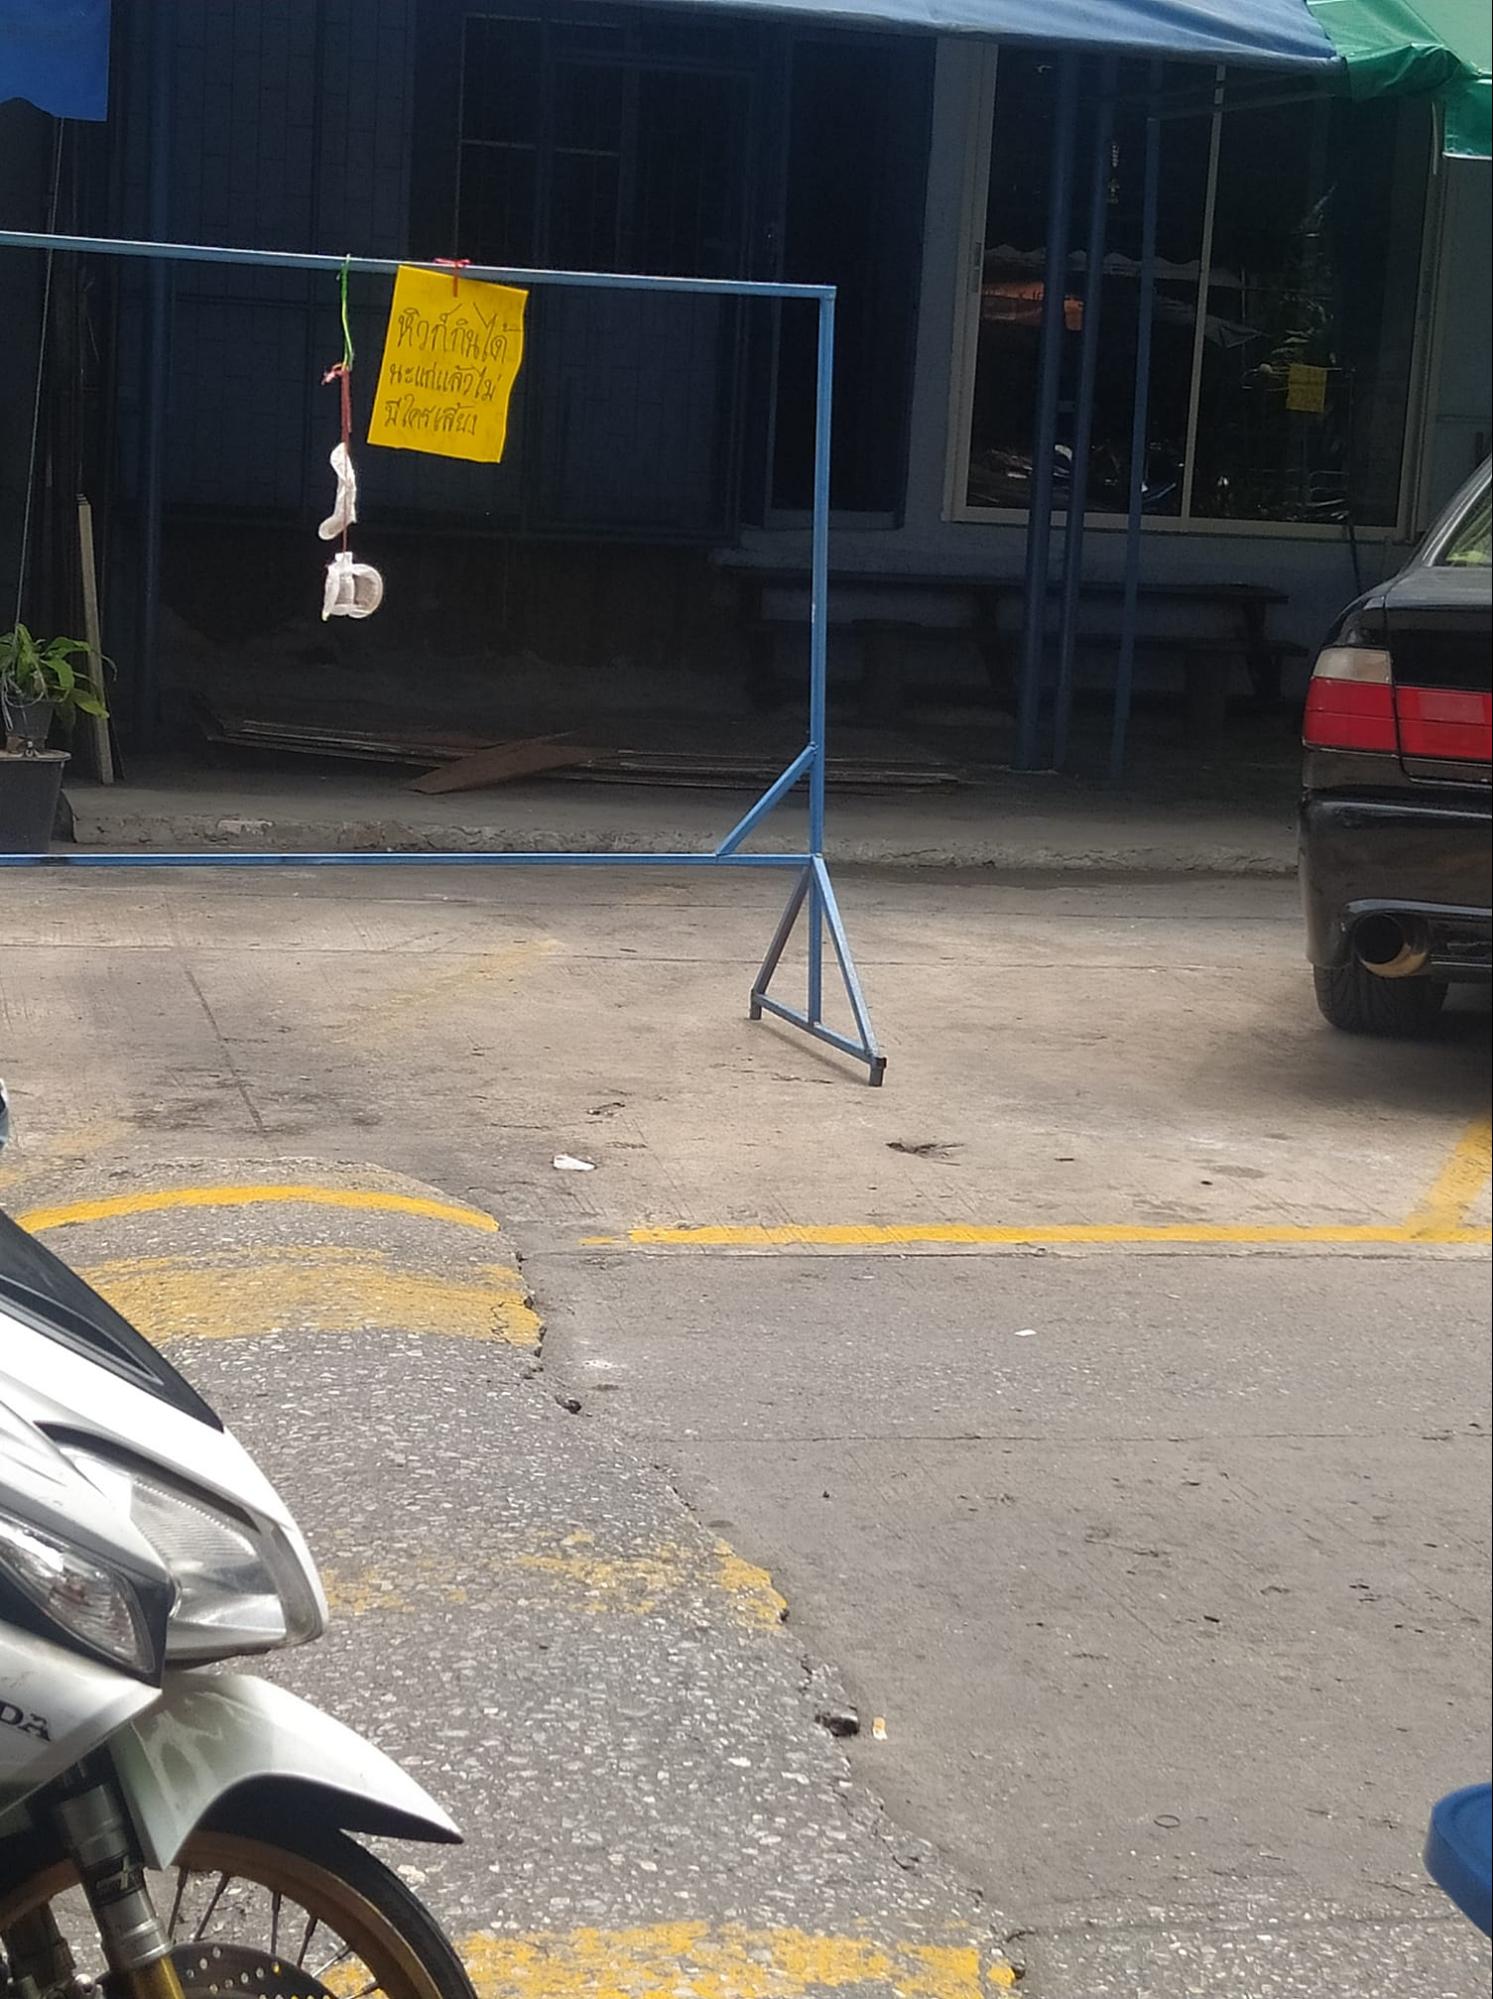 Woman Throws Clothesline With Used Sanitary Napkin At Another Car To Defend Parking Space